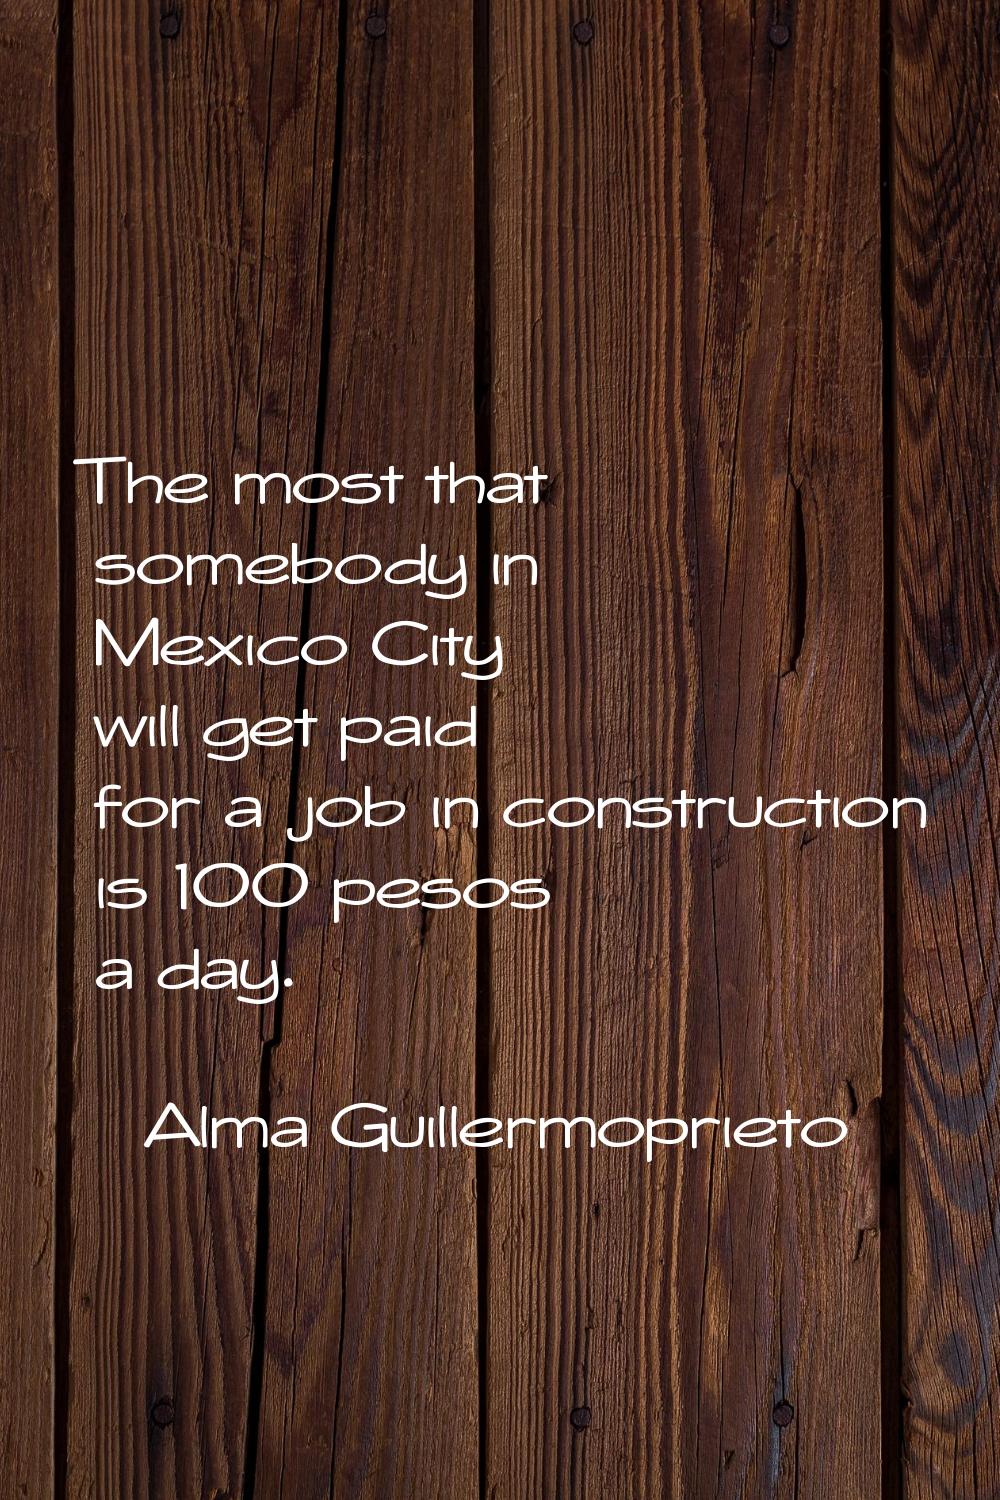 The most that somebody in Mexico City will get paid for a job in construction is 100 pesos a day.